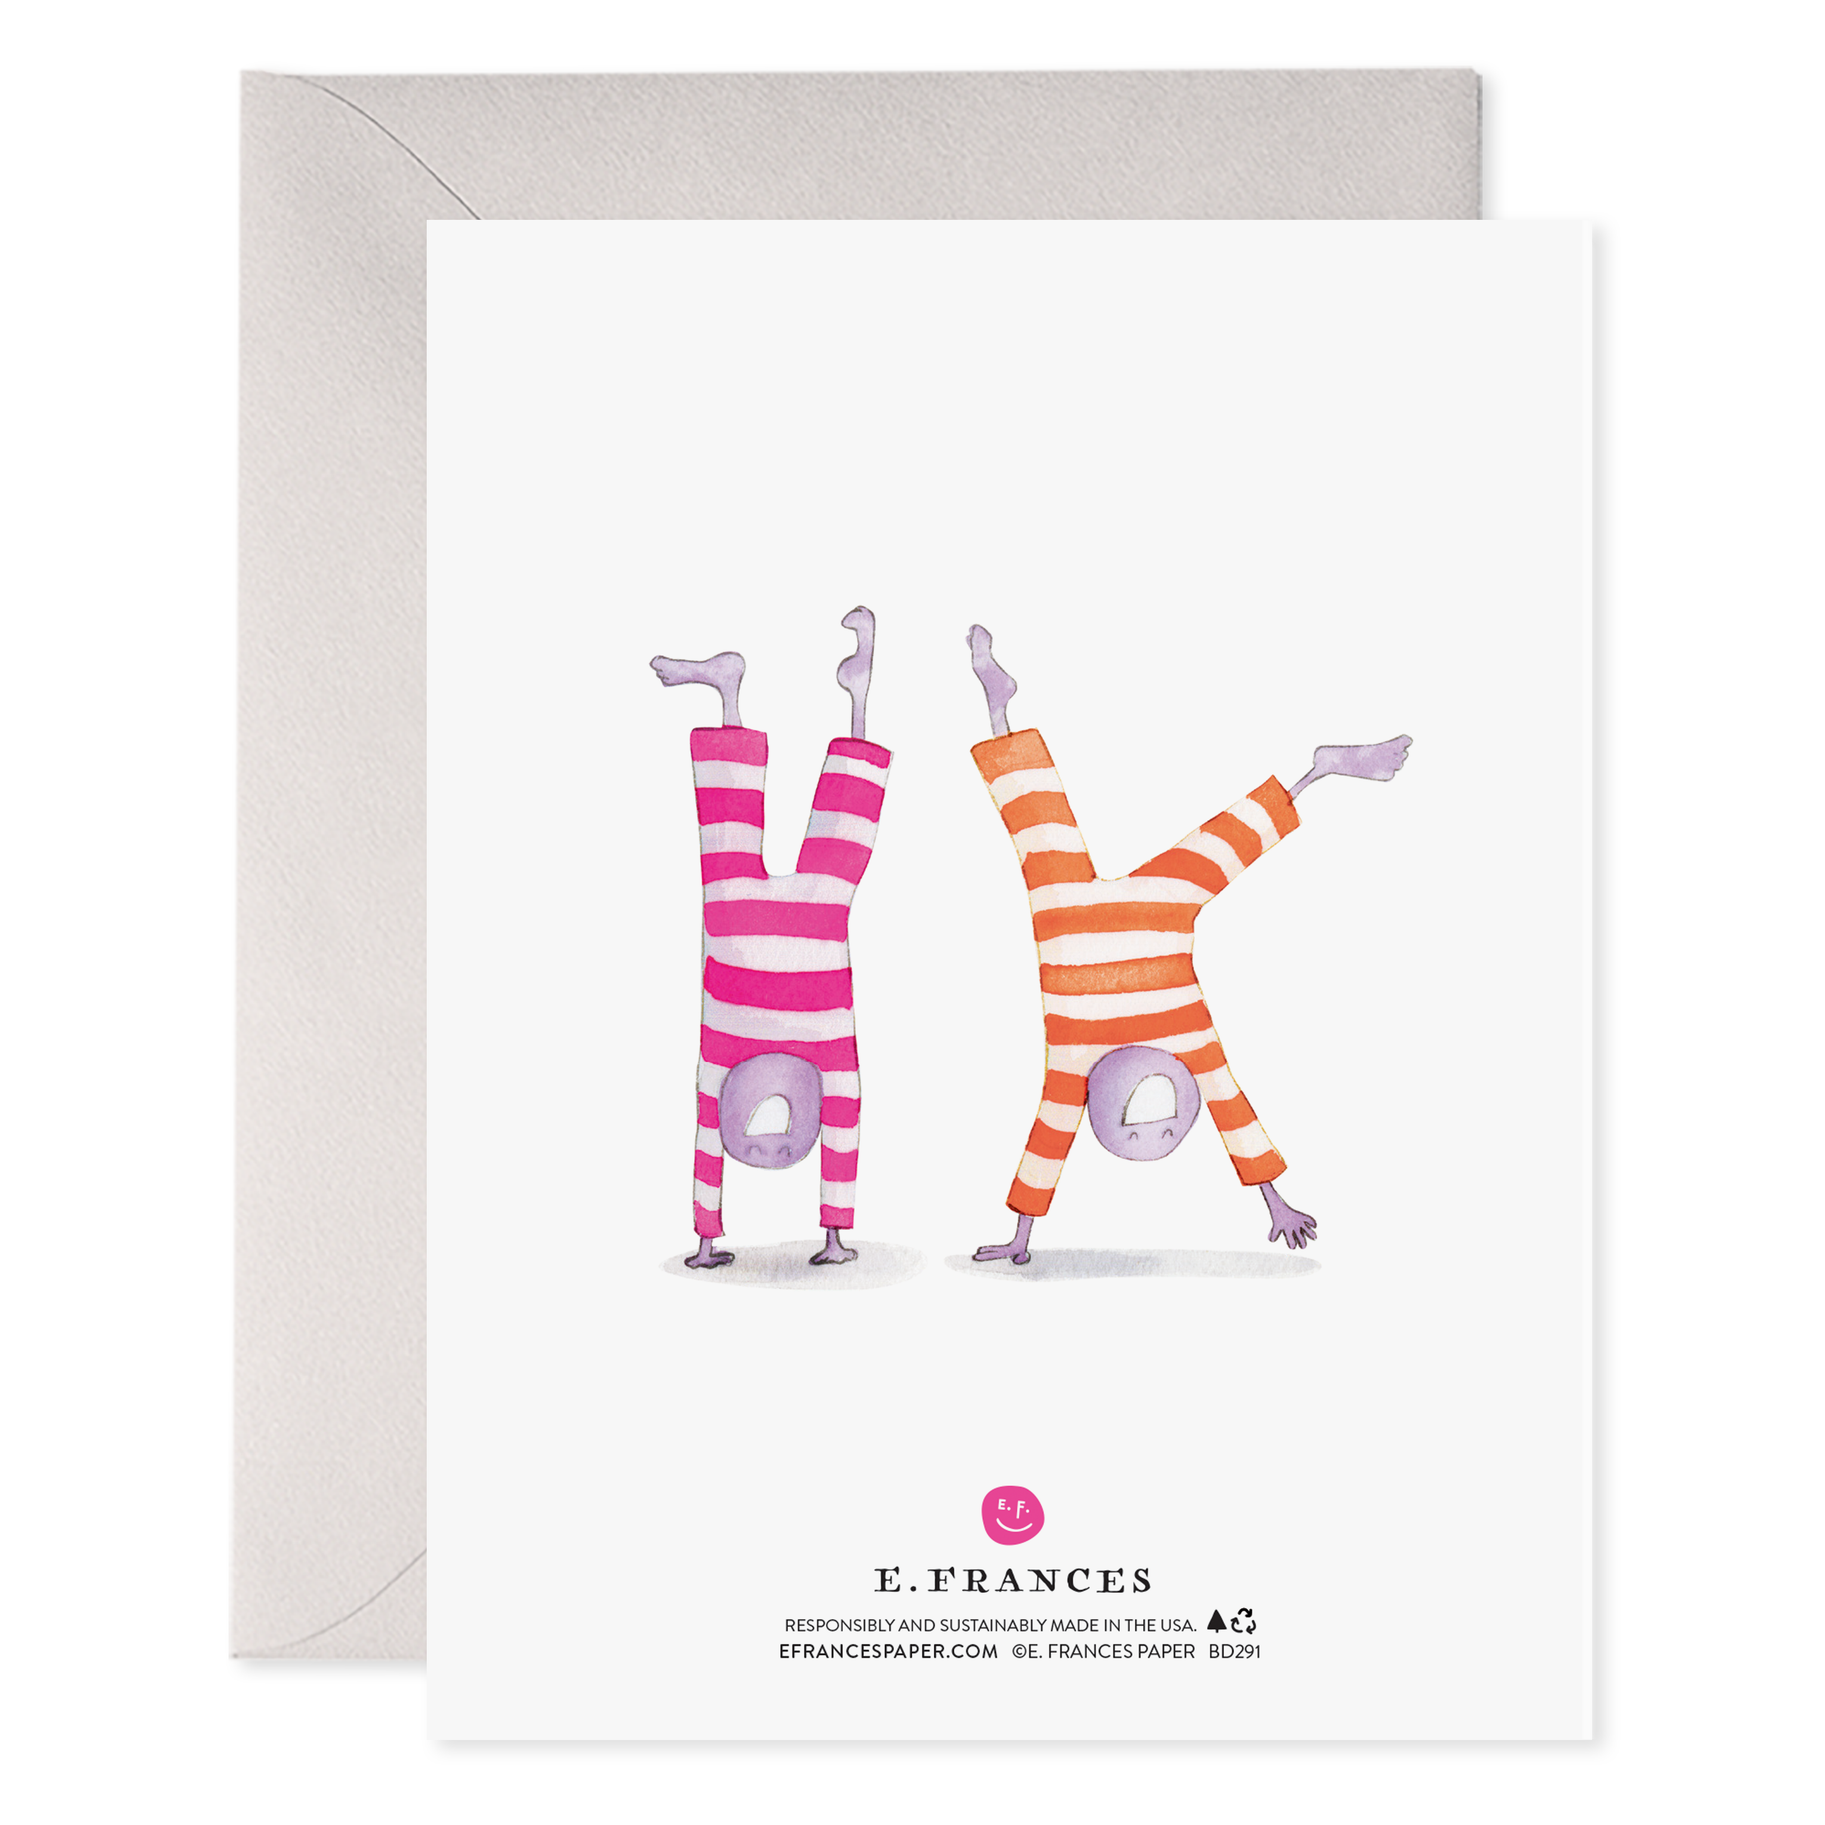 We Are the Fun Ones Birthday Card